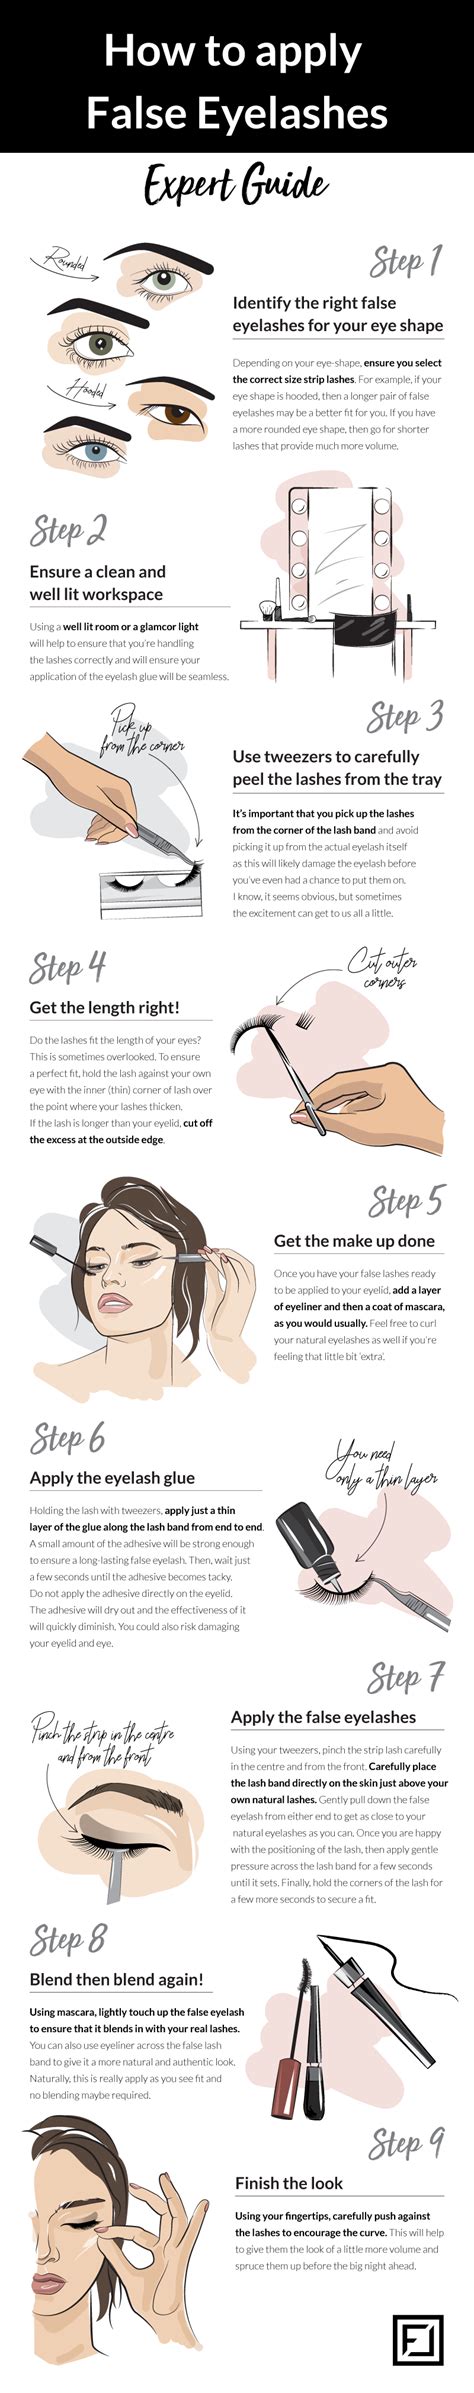 False lashes, in my opinion, are simply every girls' best friend. THE MAYBELLINE STORY : HOW TO APPLY FALSE EYELASHES ...